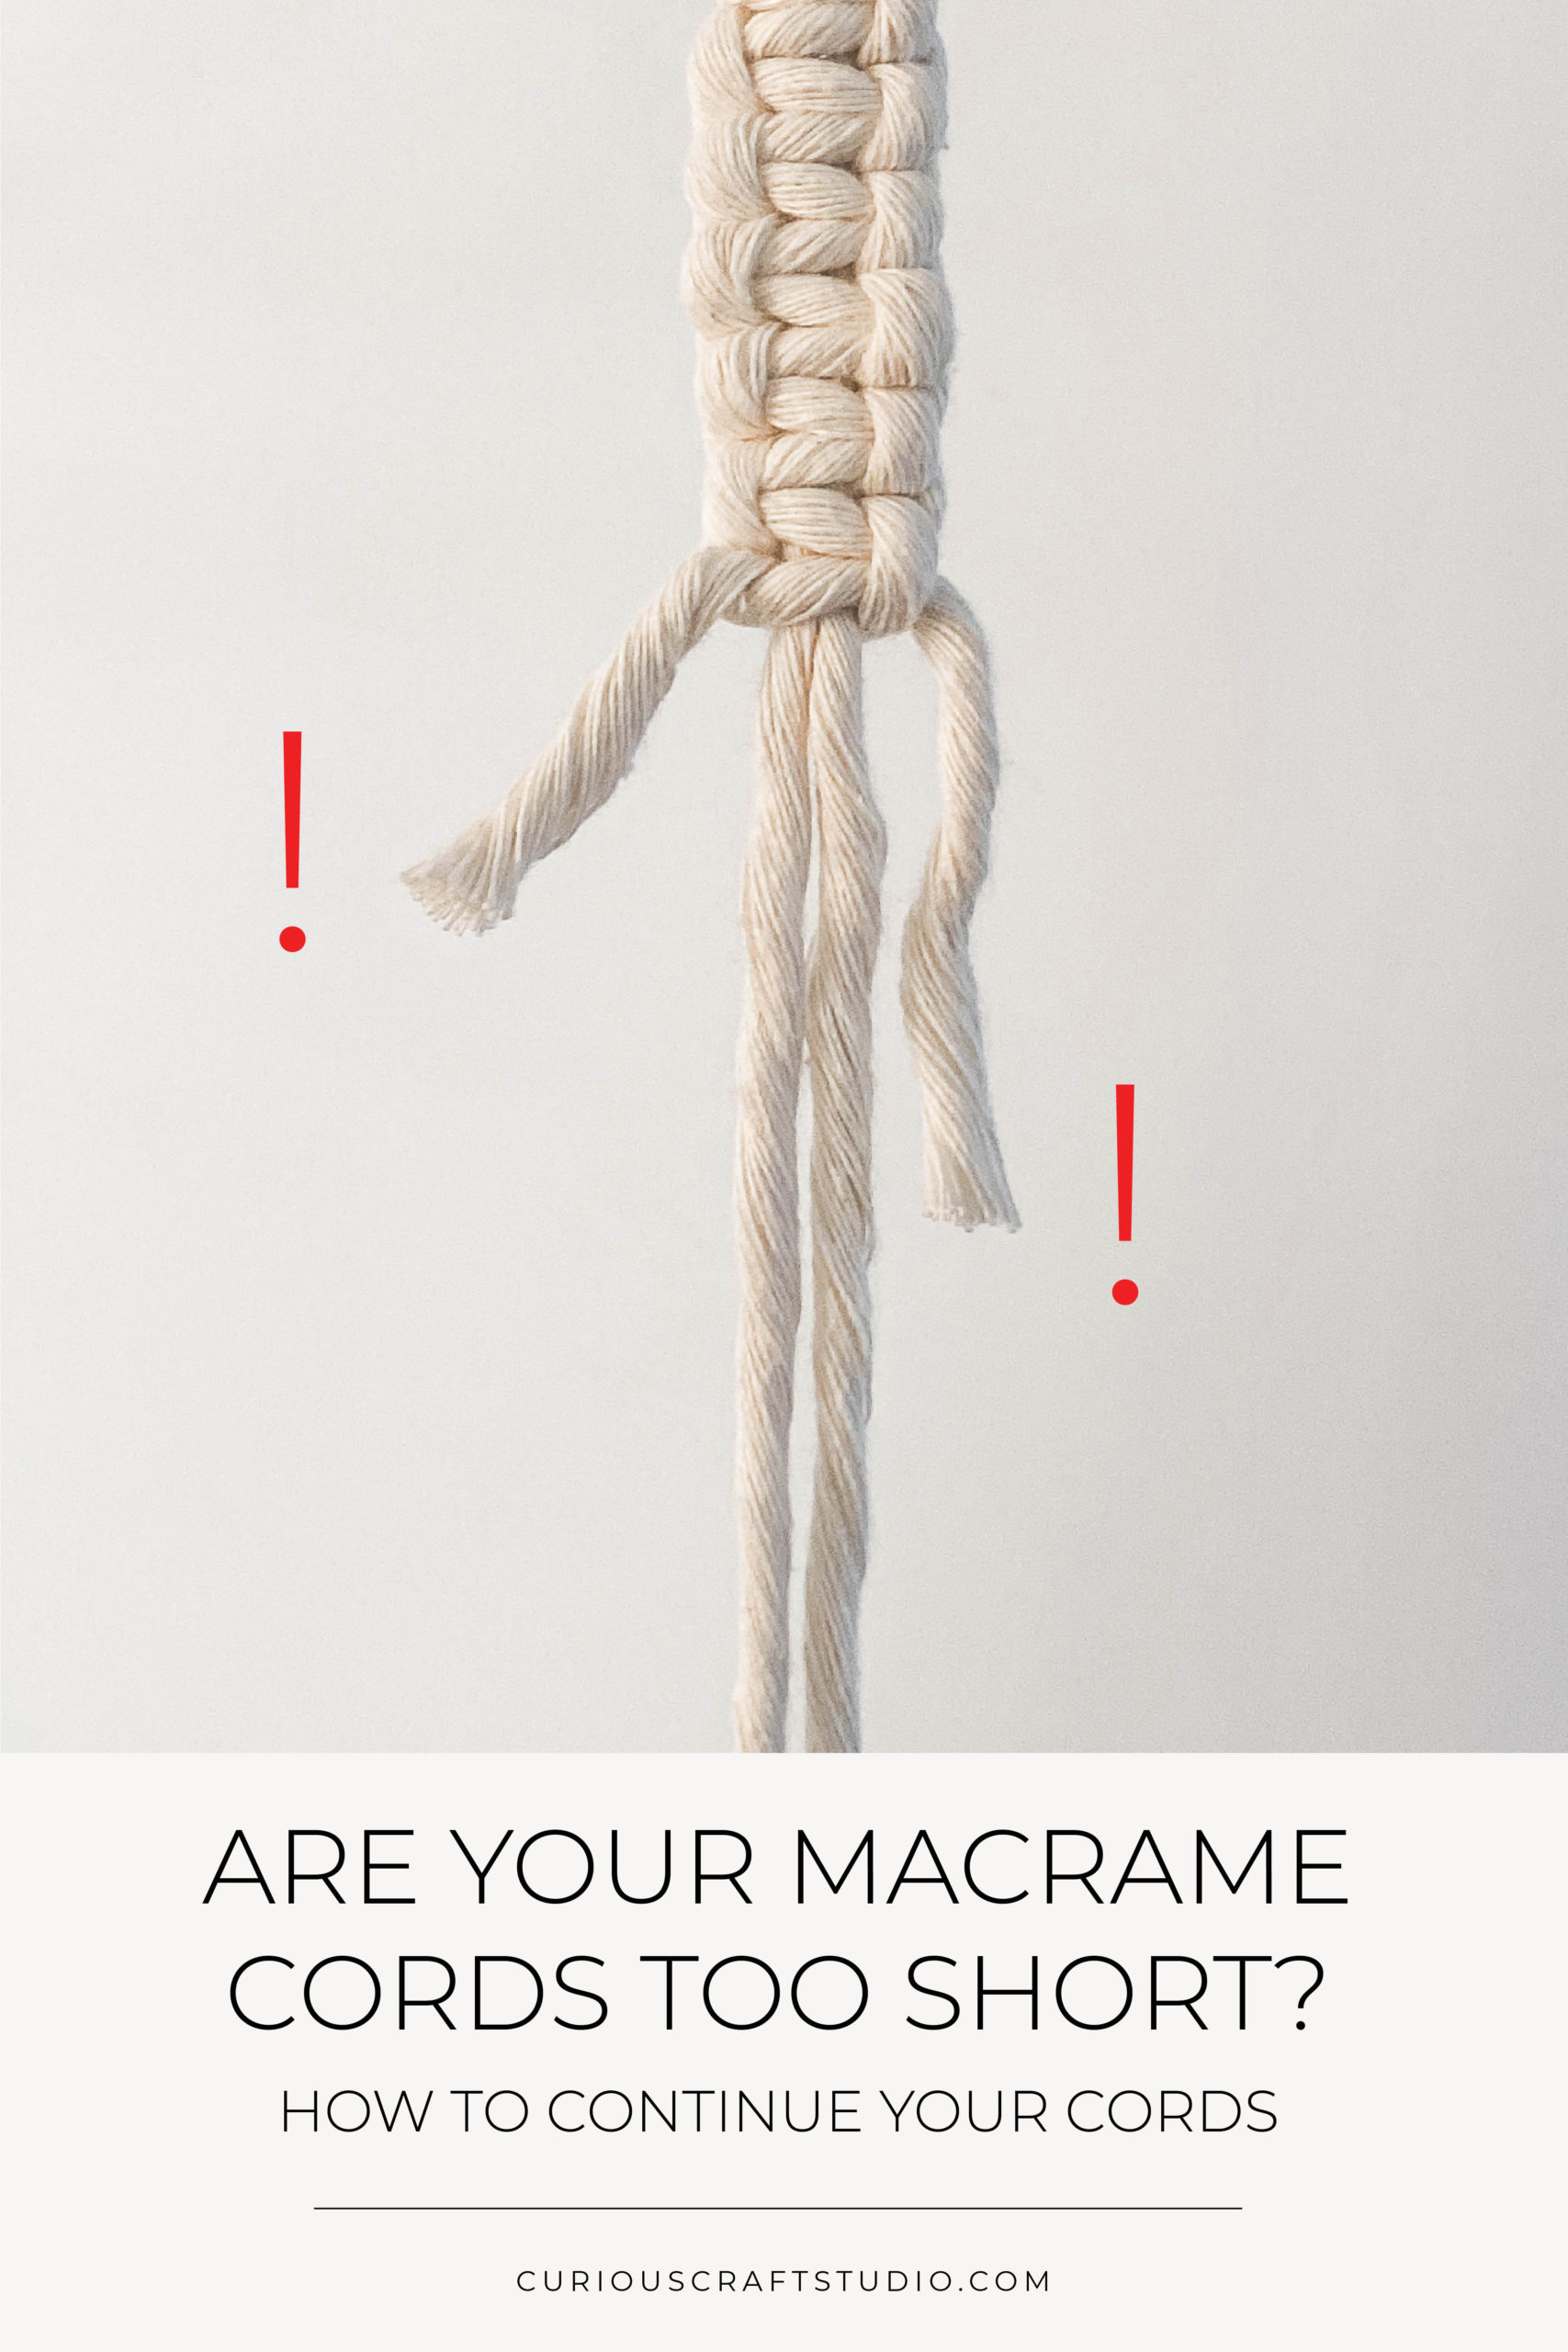 Forvirre relæ Ødelægge Macrame cord too short? How to continue your cord?